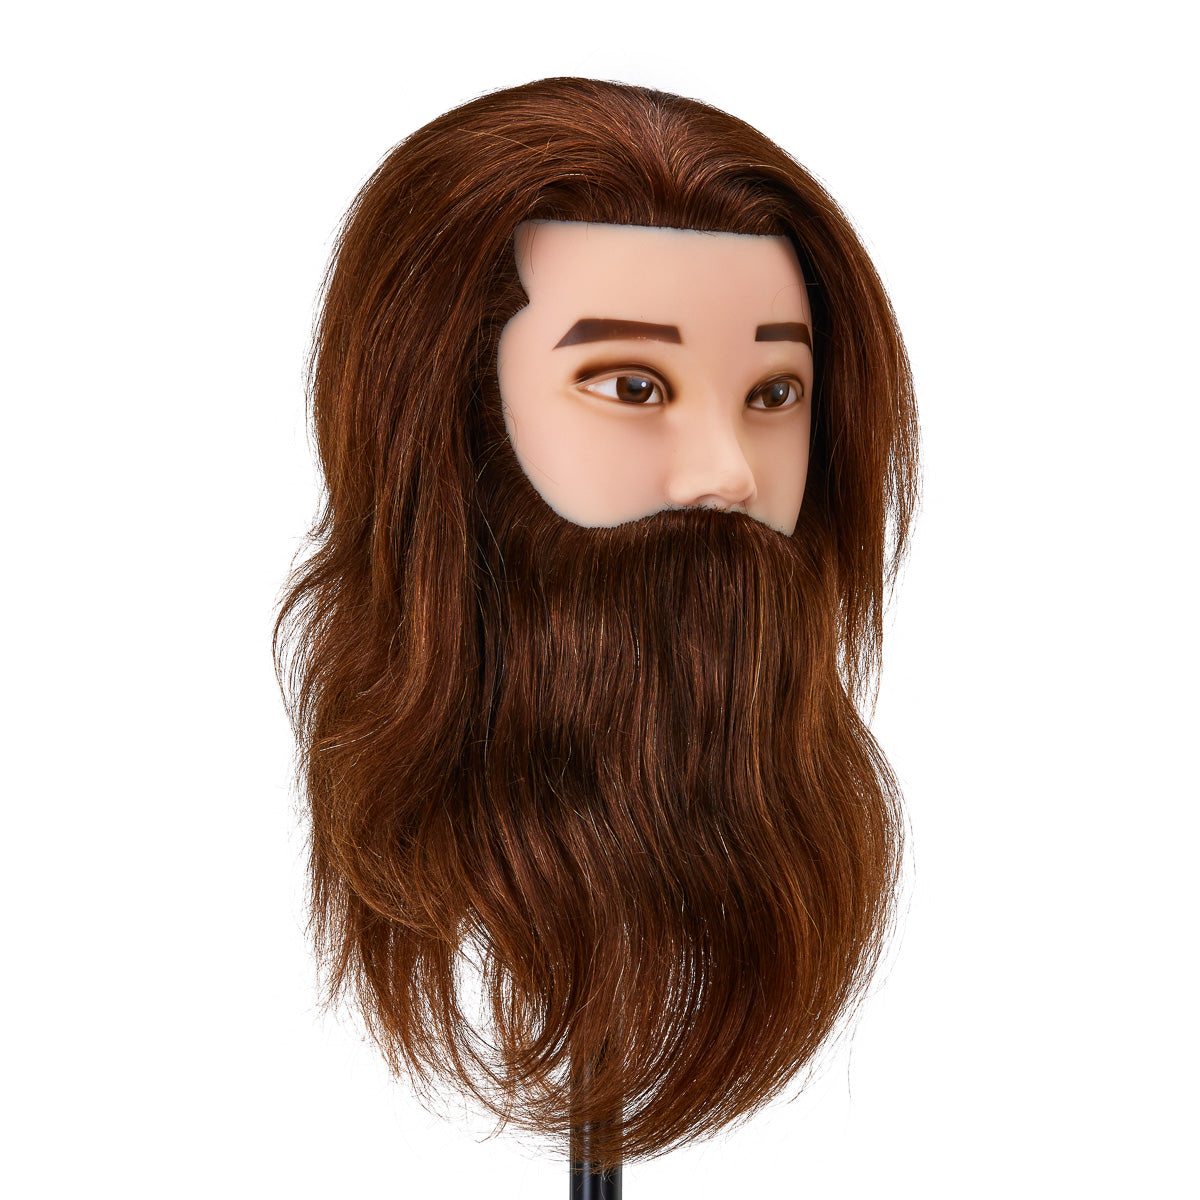 Gabbiano WZ4 Hairdressing Practice and Beard Head with Natural Hair, Color 4#, Length 8"+6" 